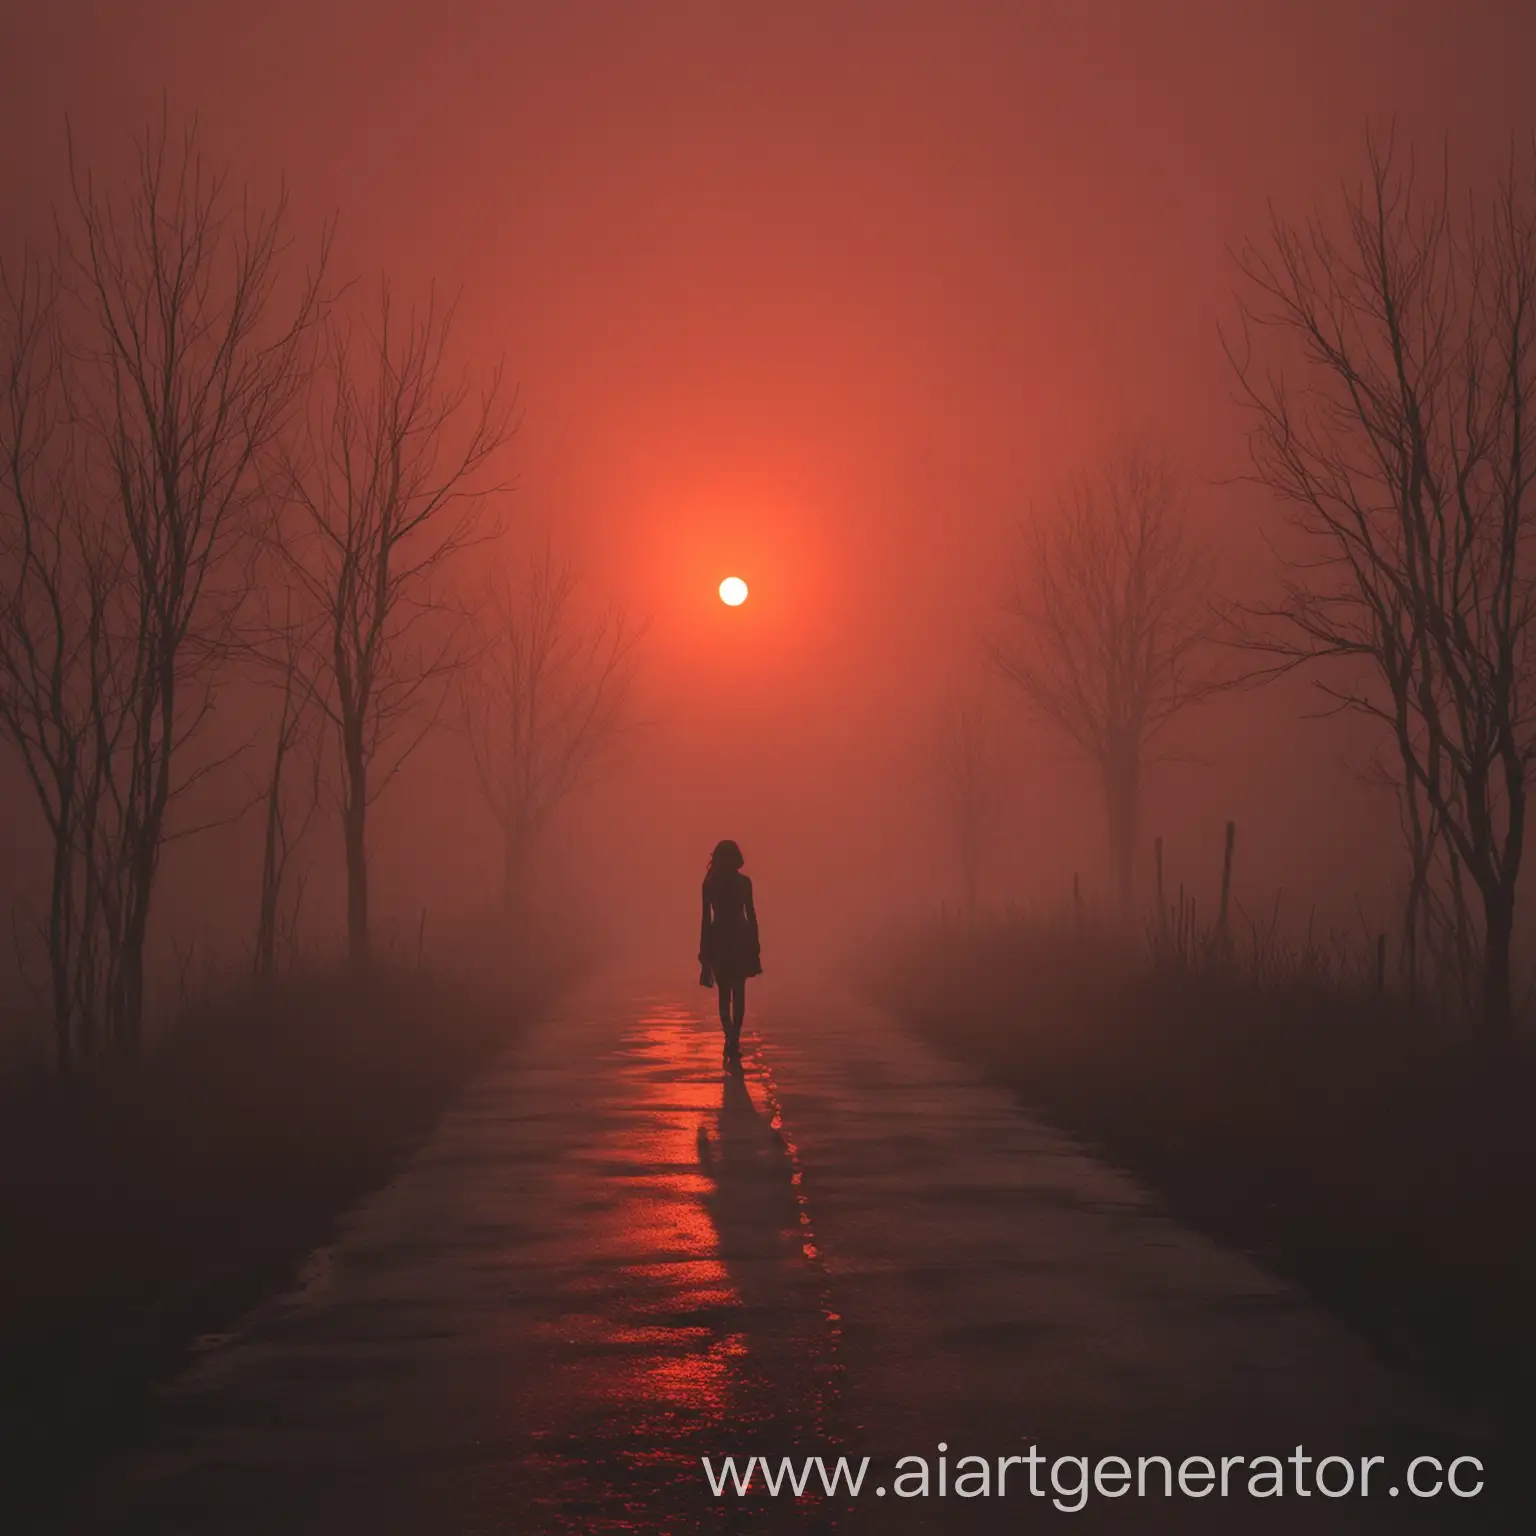 Lonely-Girl-Walking-Towards-Red-Sunset-in-Foggy-Landscape